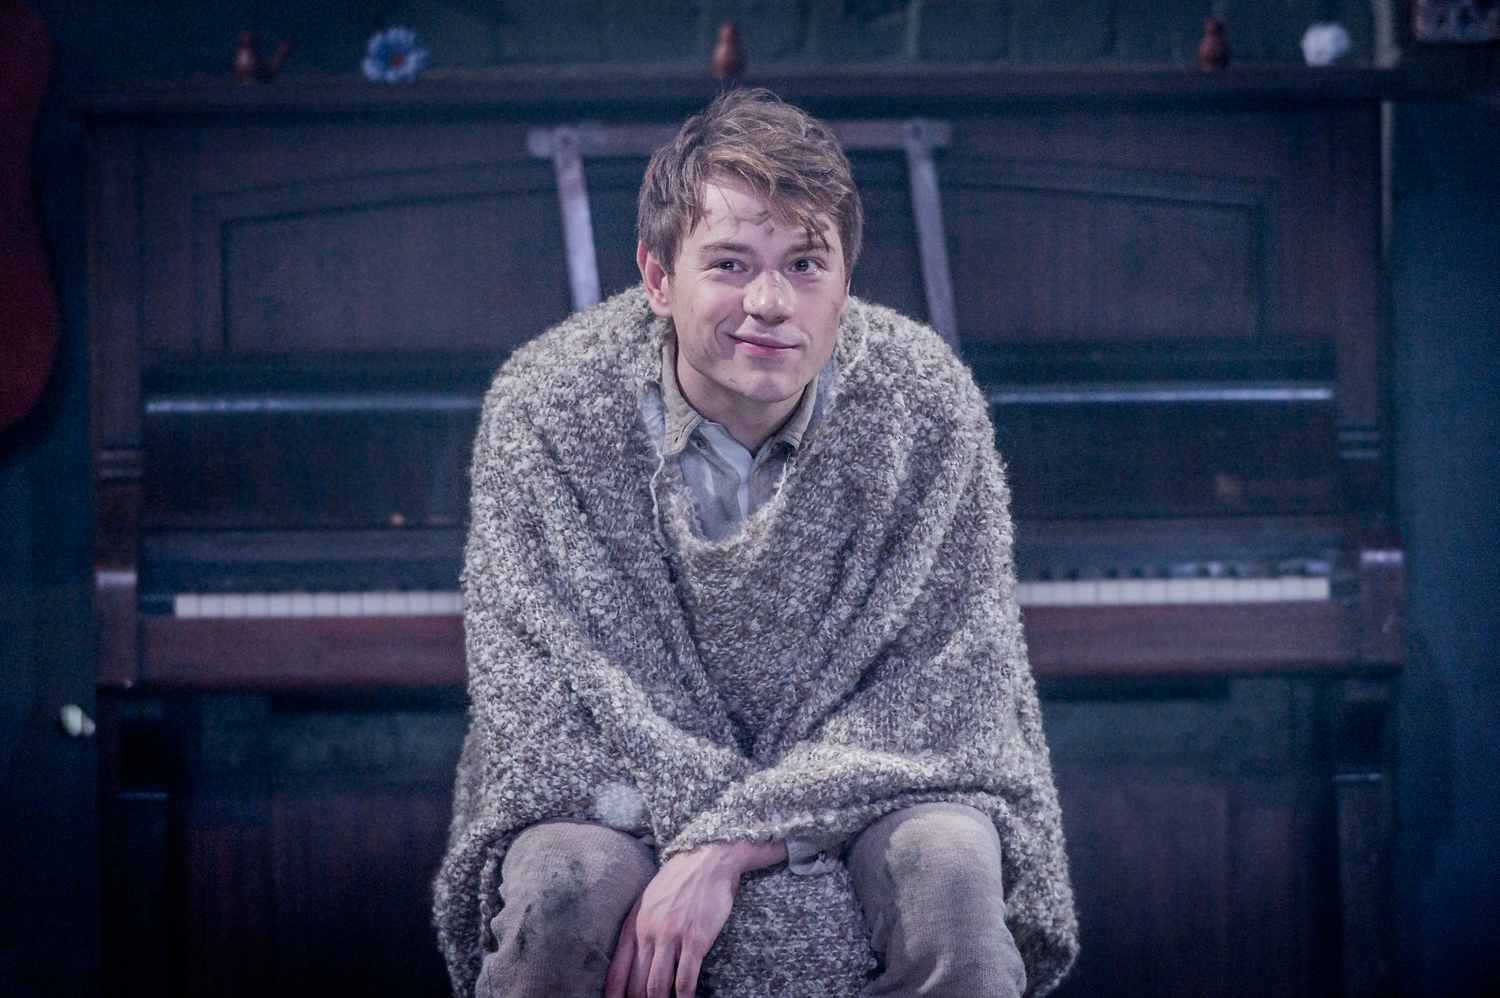 Sam Townsend in As You Like It, composed by Jude Obermüller (photo by Robert Workman)